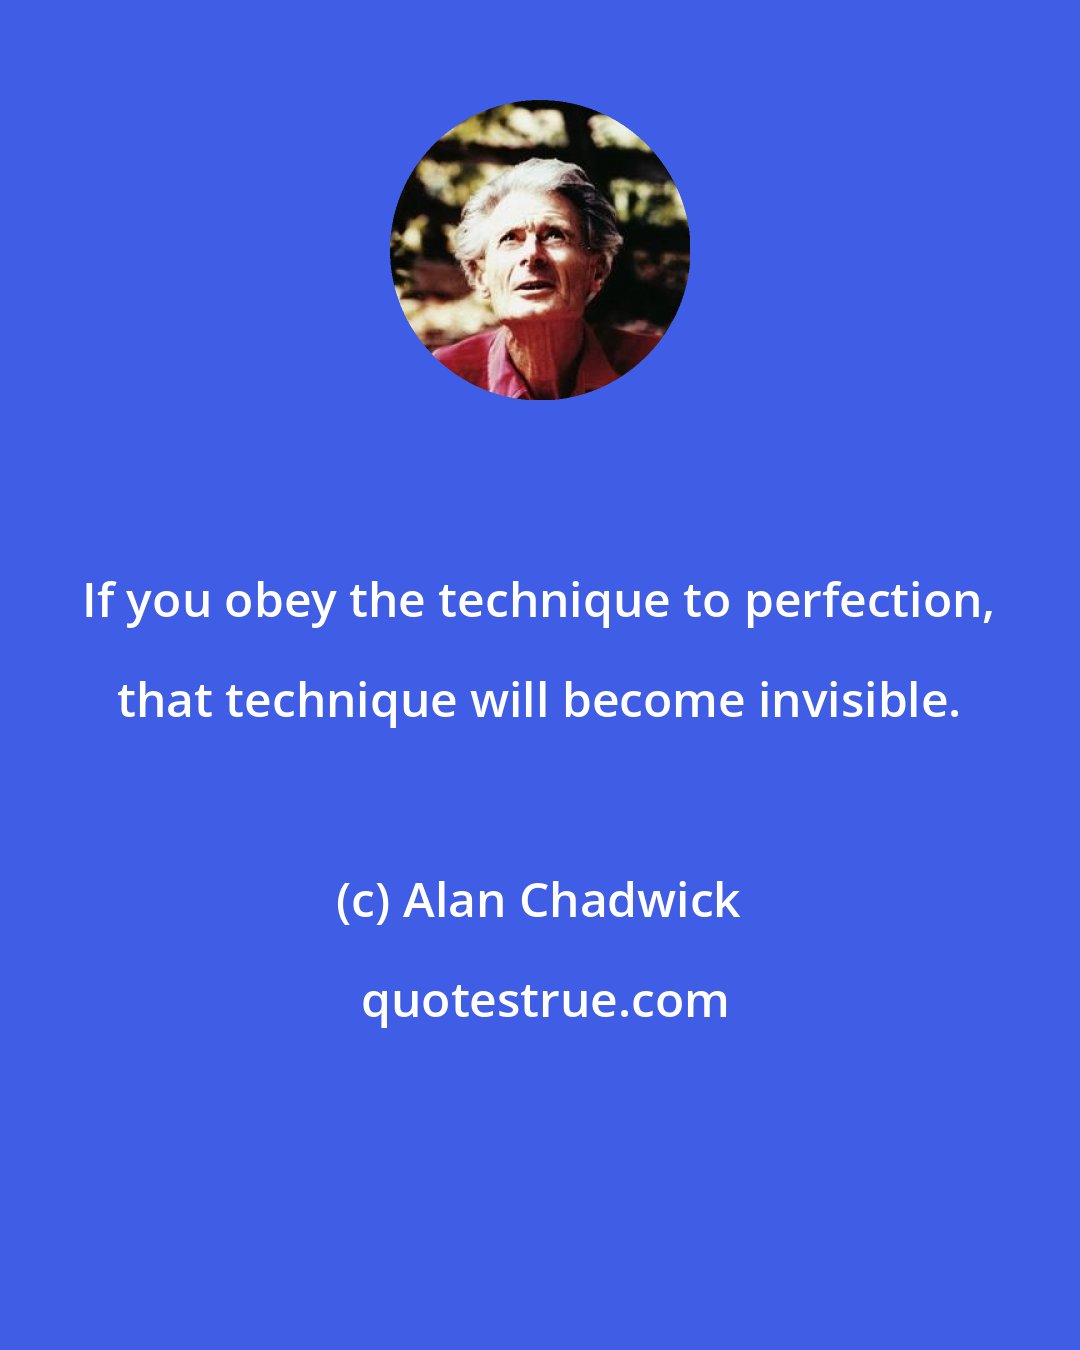 Alan Chadwick: If you obey the technique to perfection, that technique will become invisible.